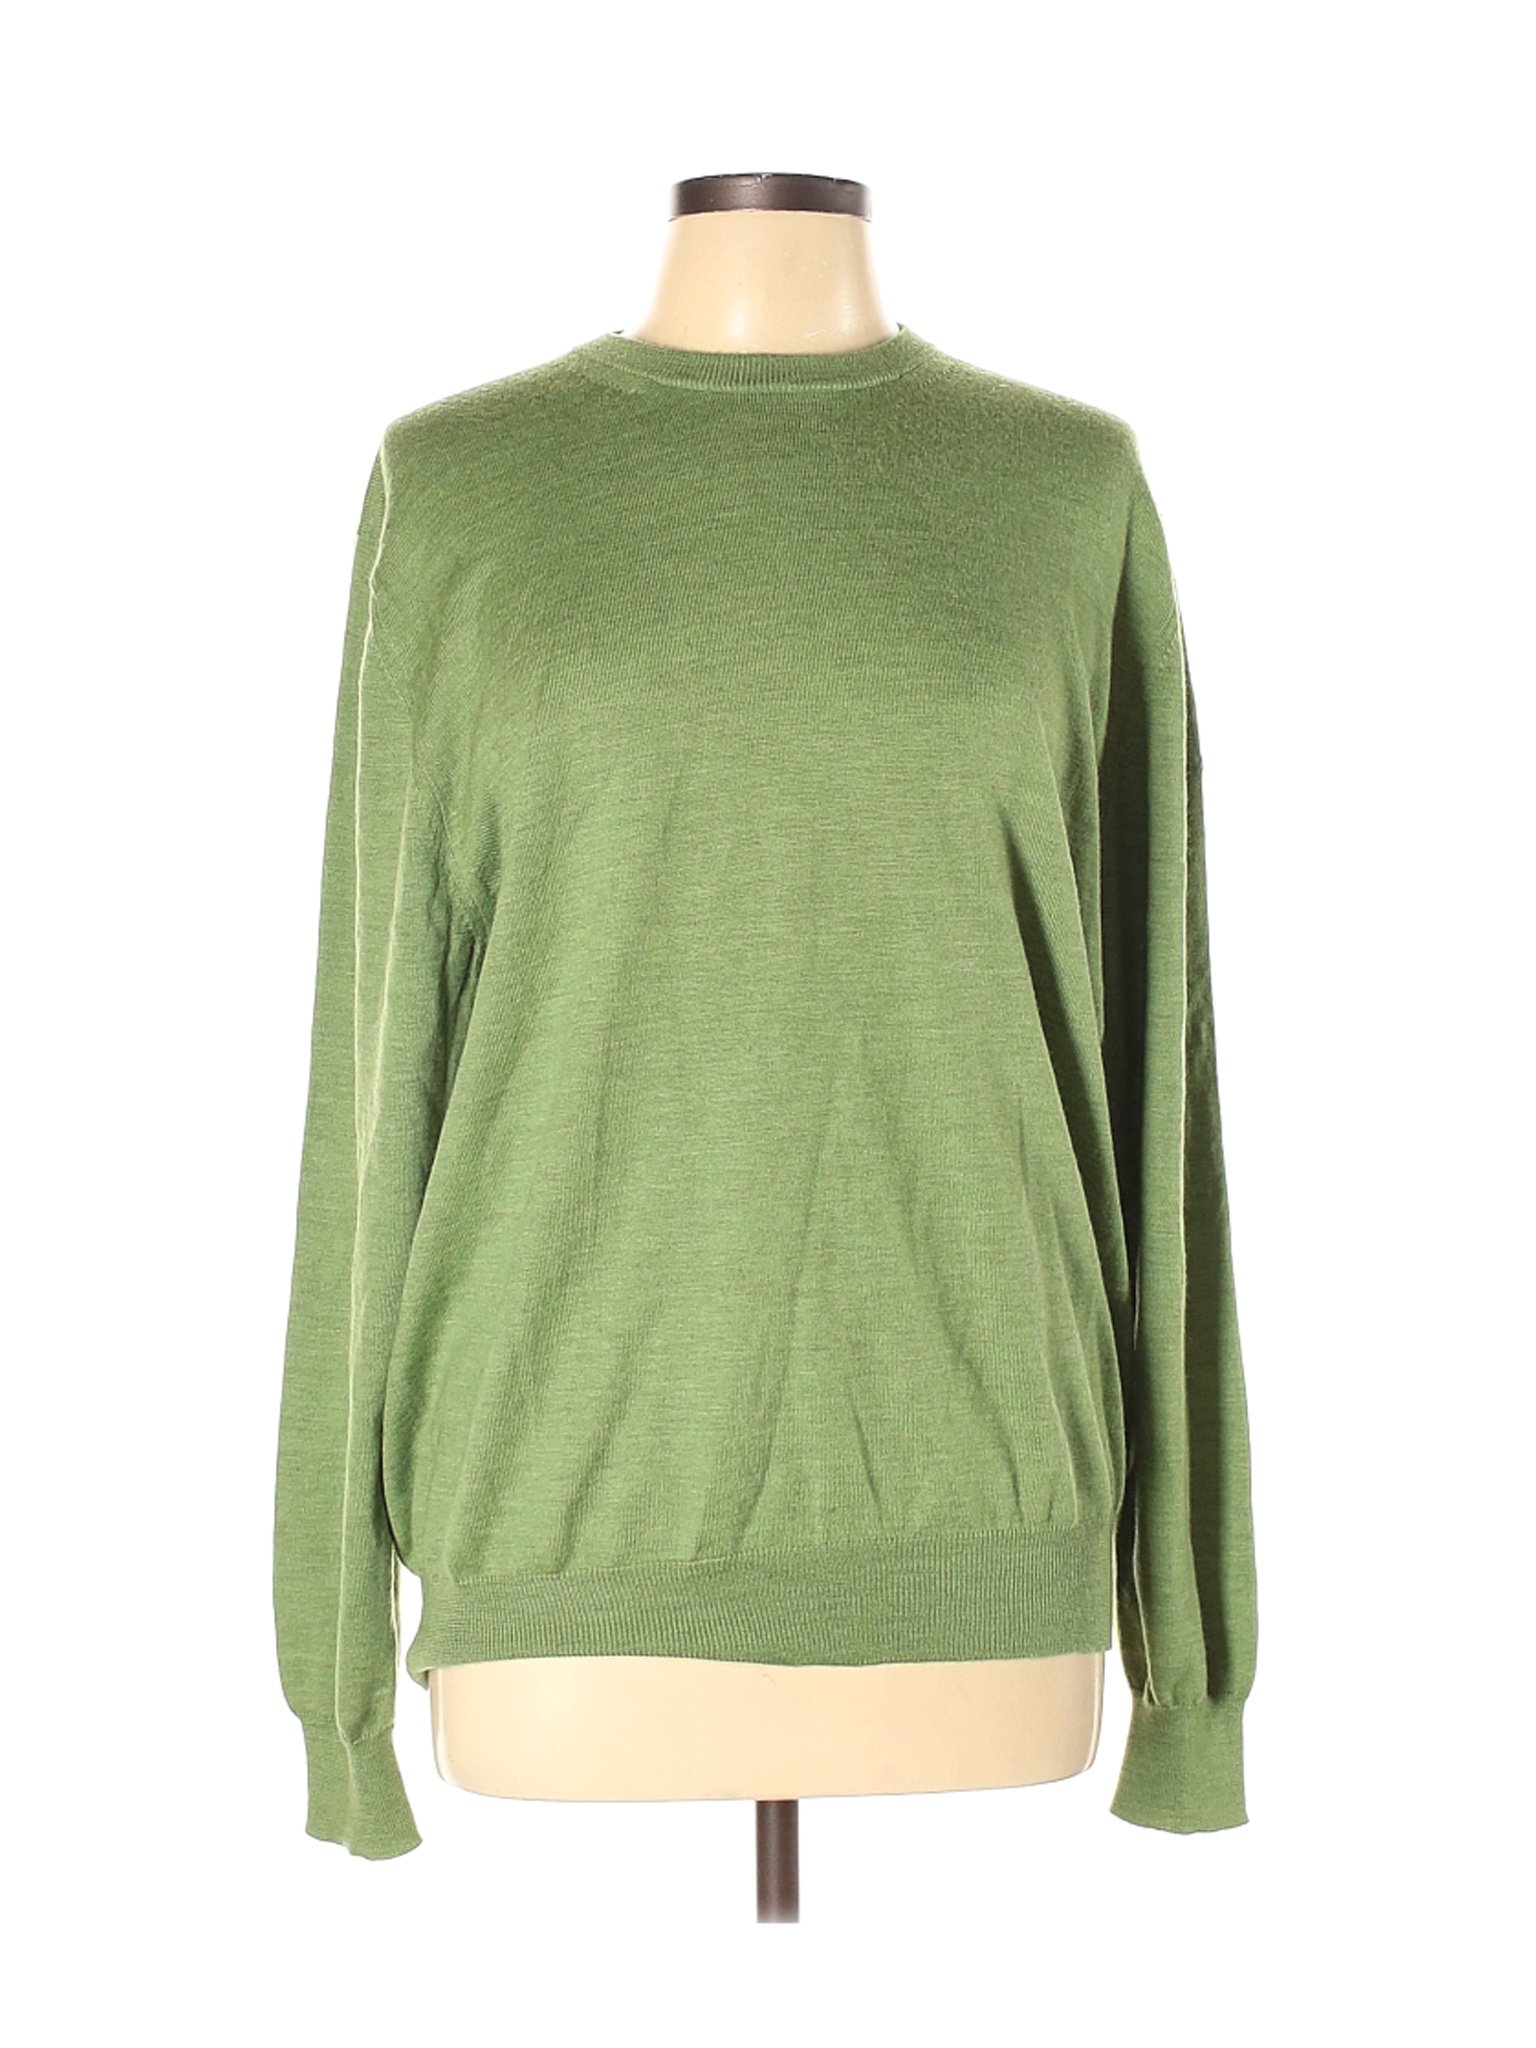 Faconnable Women Green Wool Pullover Sweater L | eBay